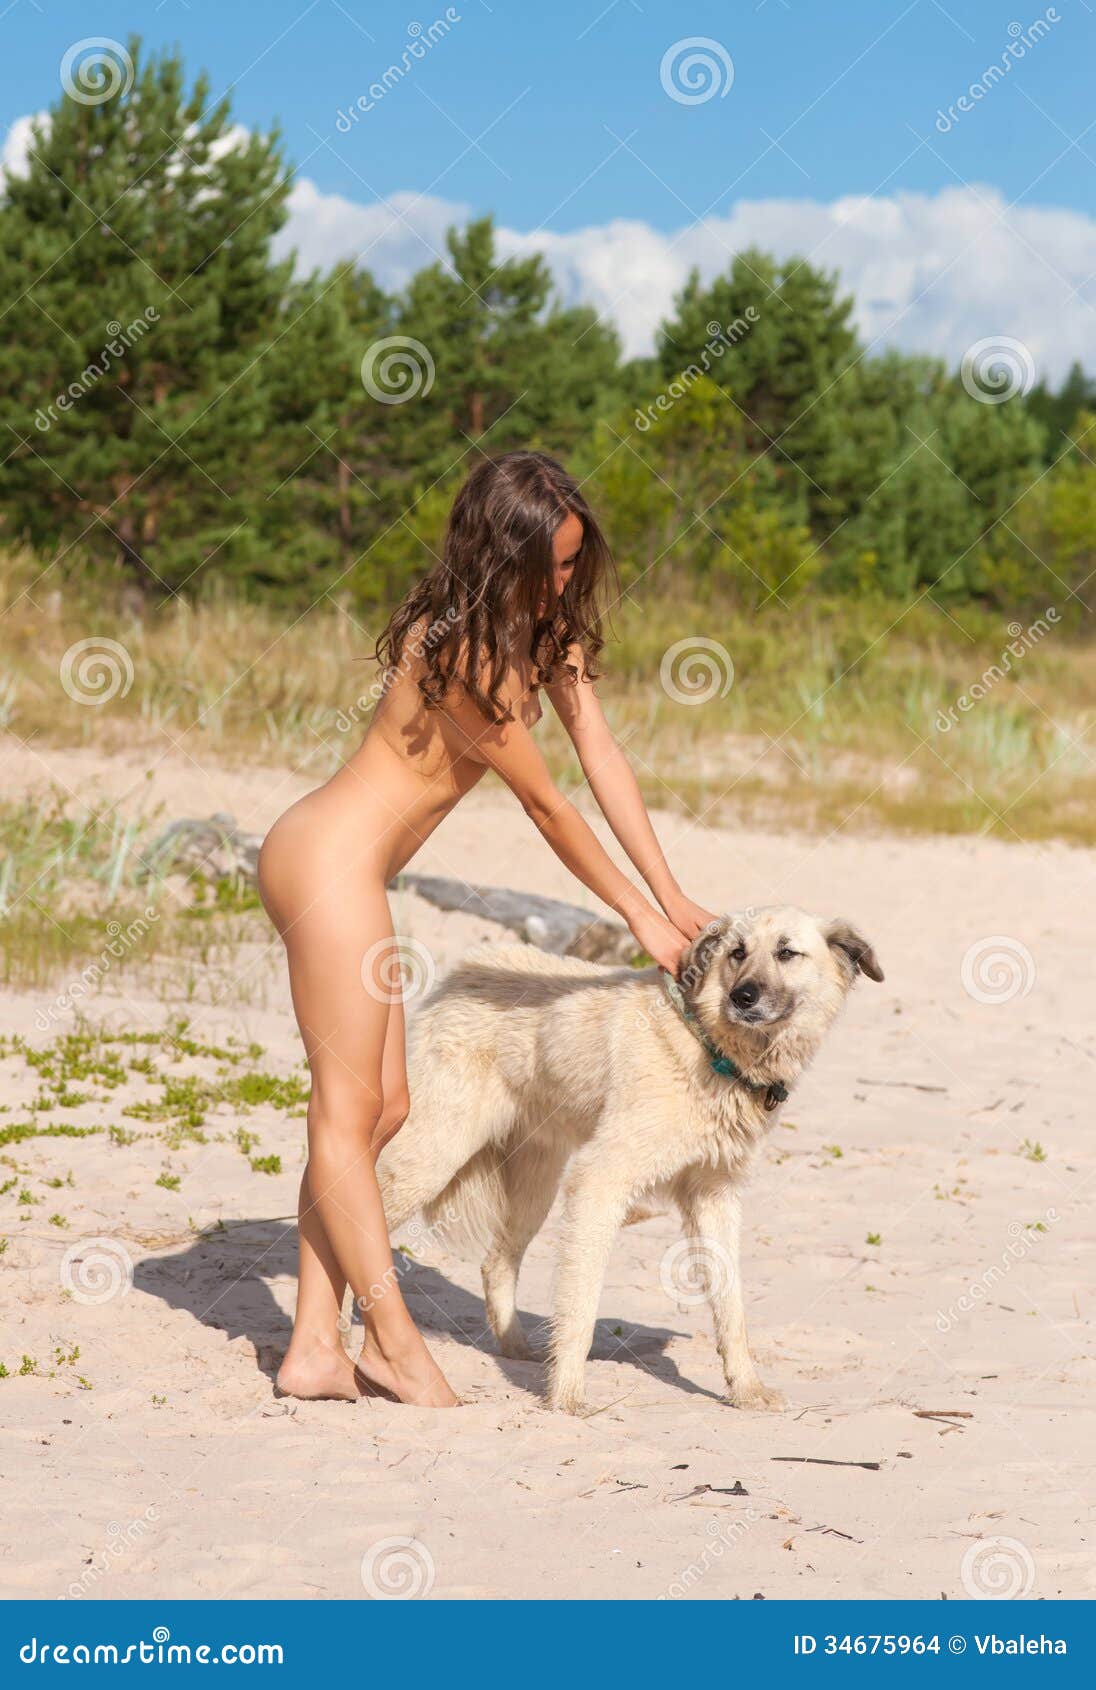 Best of Nude women and dogs